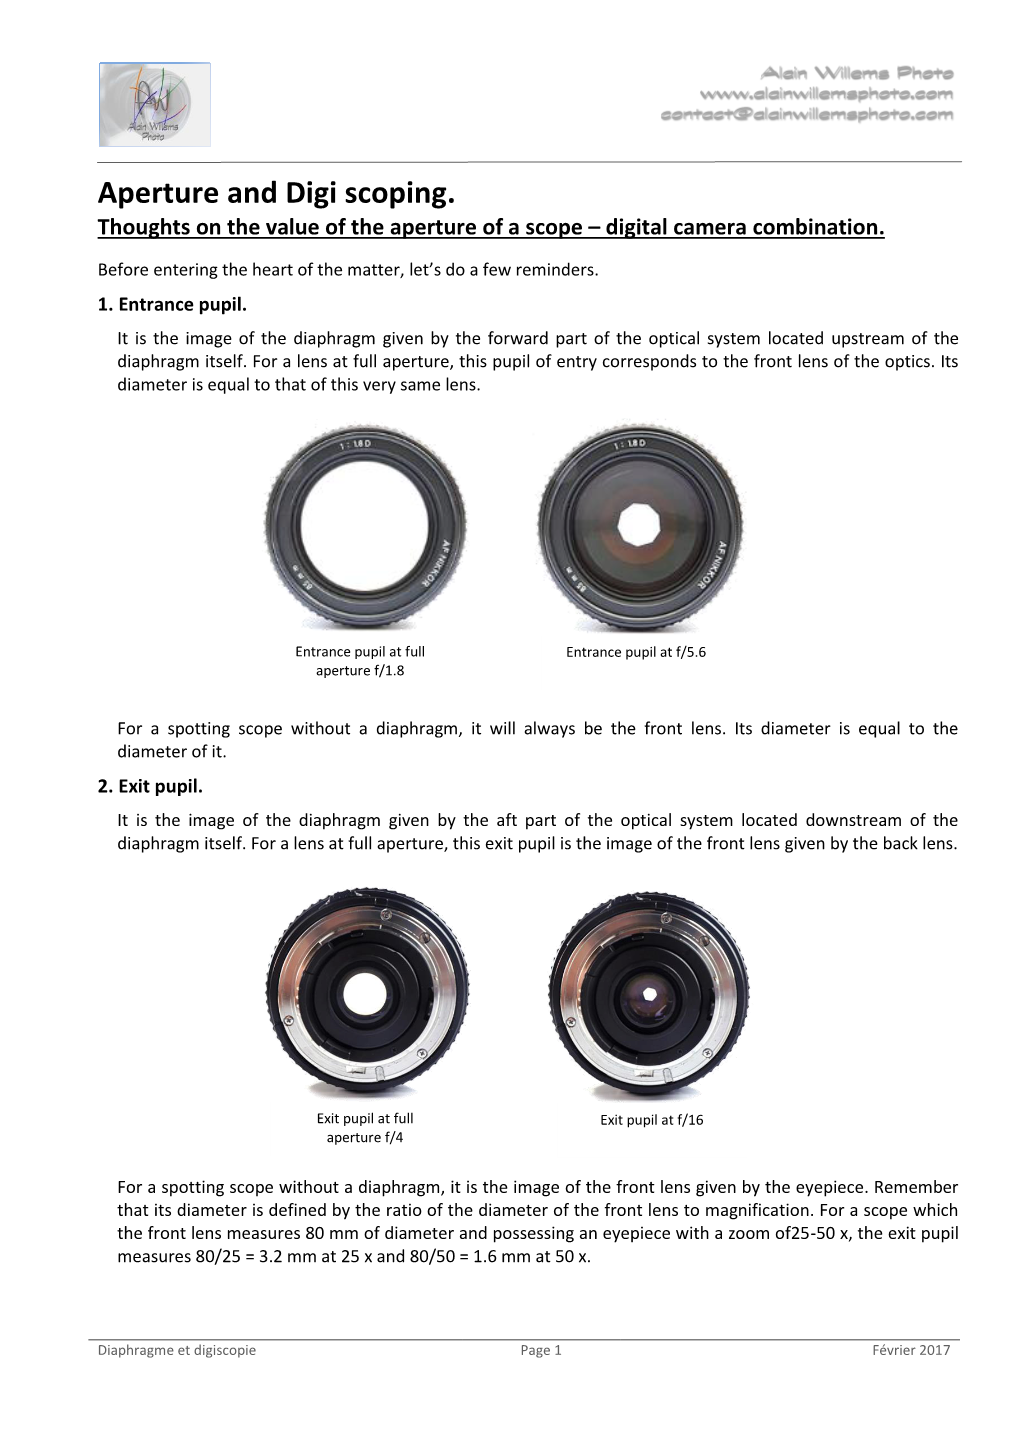 Aperture and Digi Scoping. Thoughts on the Value of the Aperture of a Scope – Digital Camera Combination